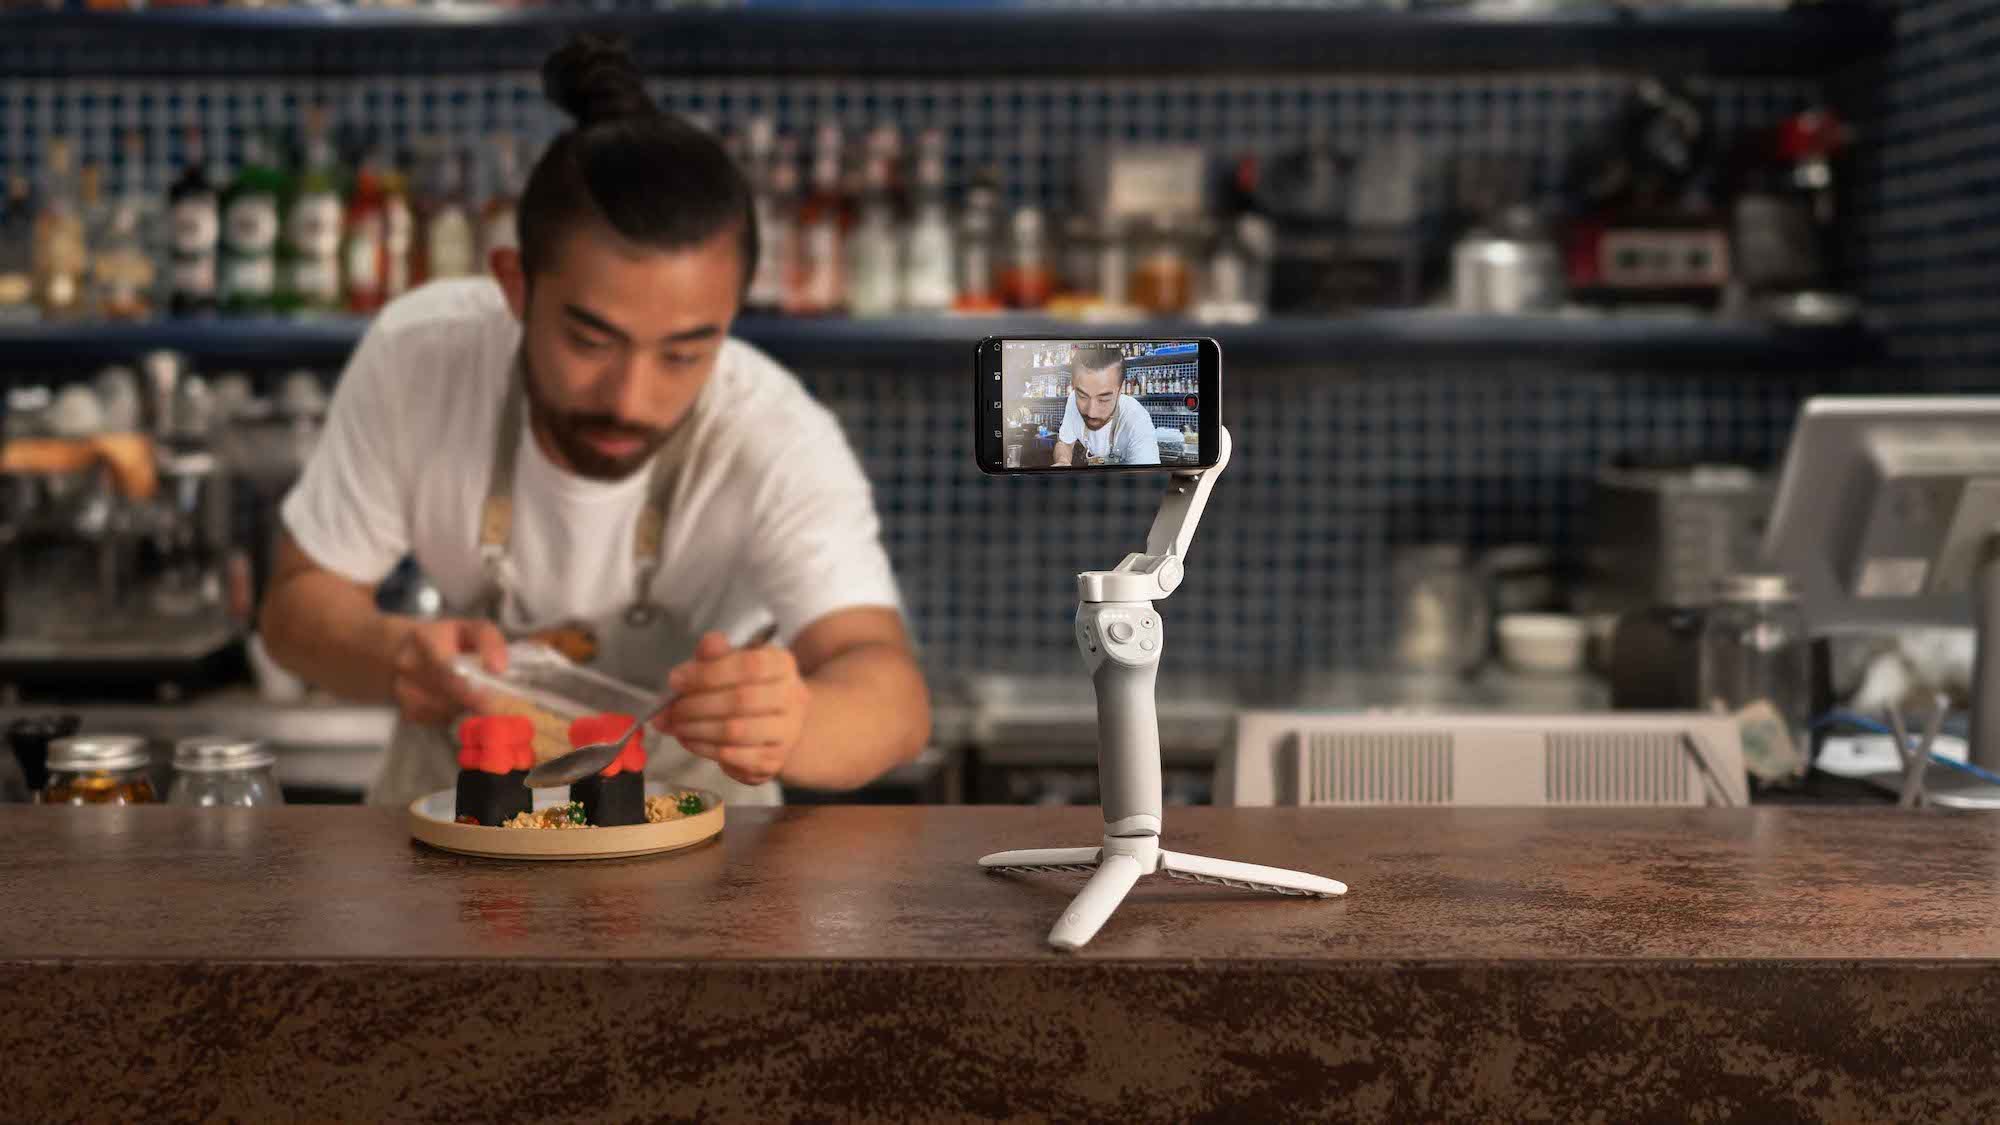 DJI Osmo Mobile 4 foldable phone gimbal has a convenient magnetic design